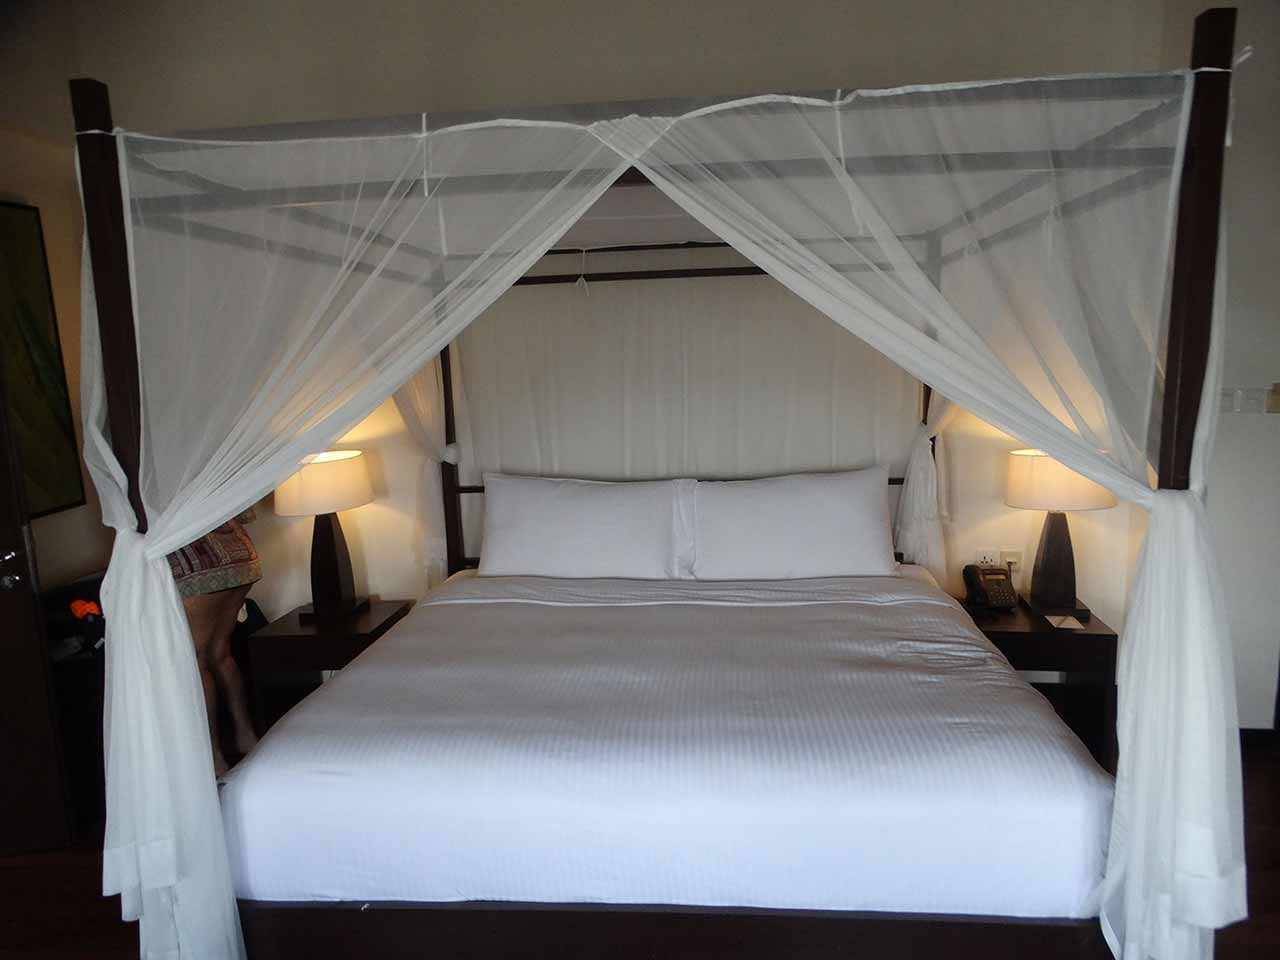 Bed at the resort